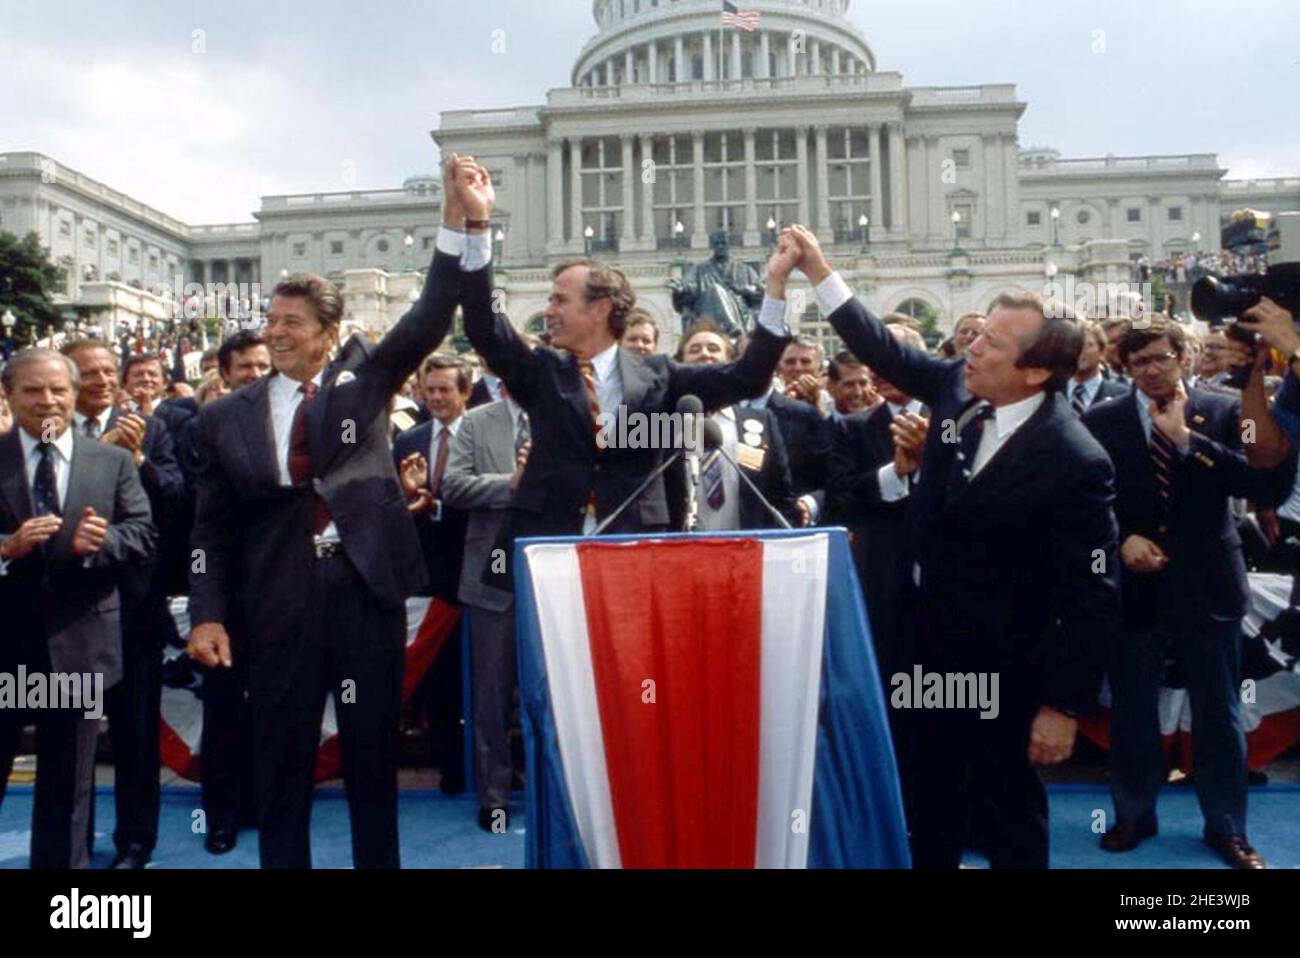 Ronald Reagan, George Bush and Howard Baker at a campaign rally in front of the U.S. Capitol in Washington, DC. Stock Photo